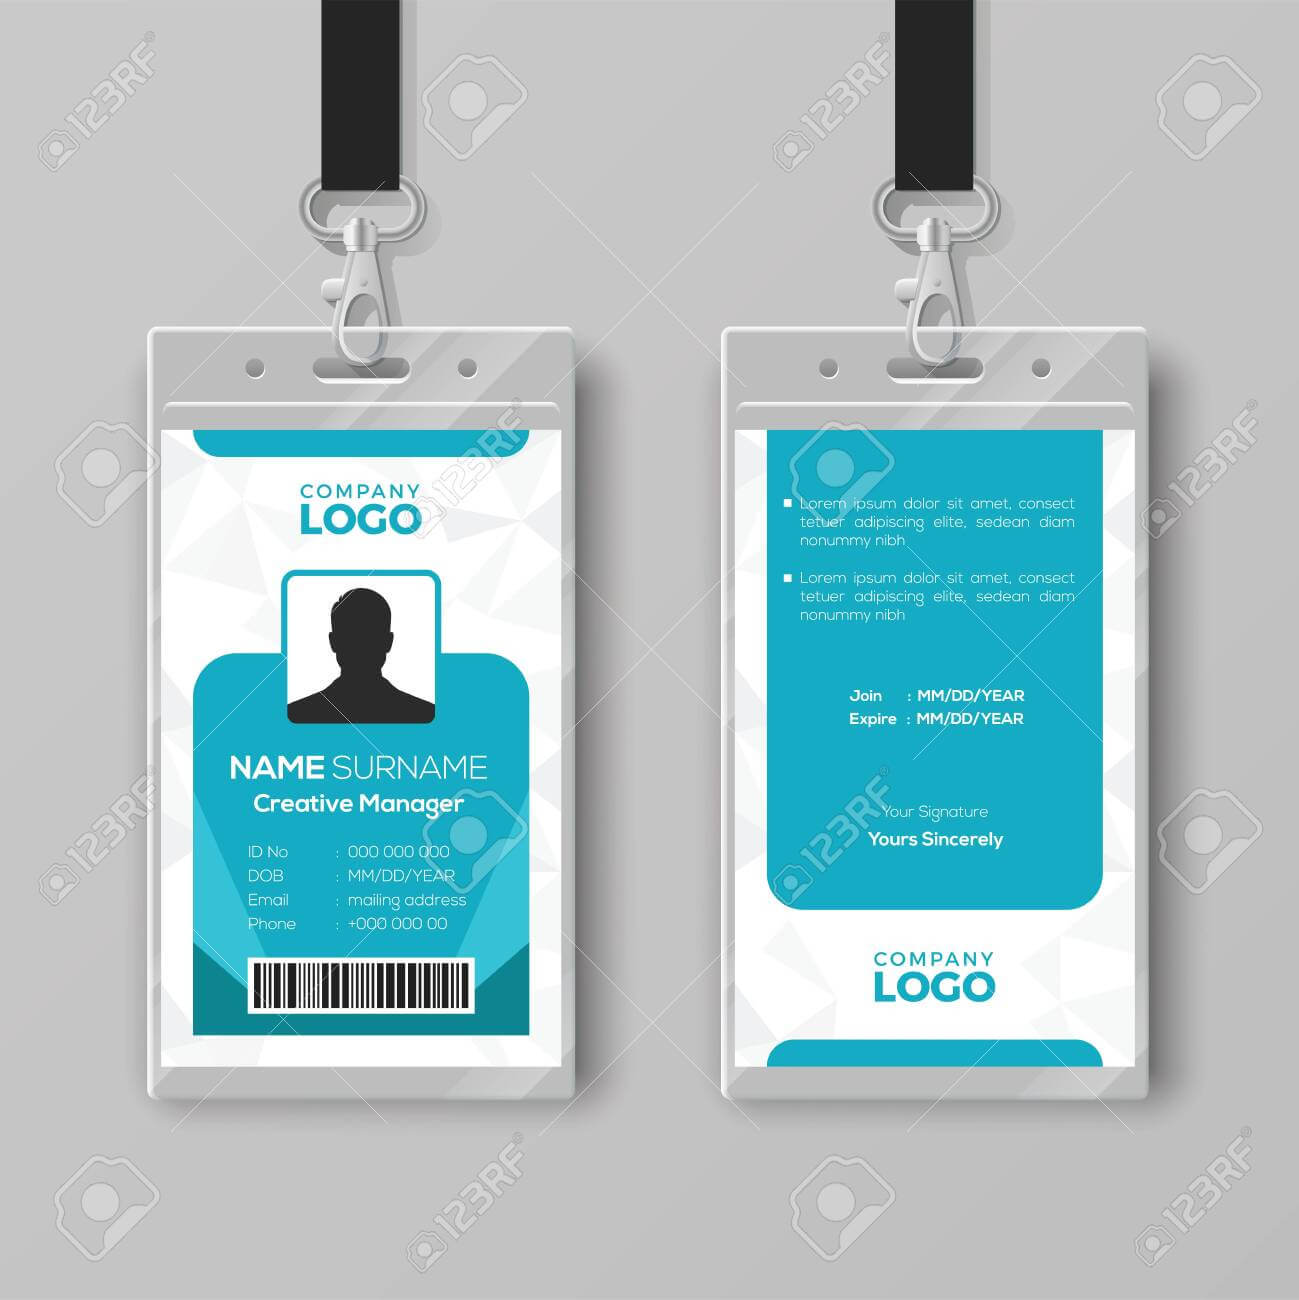 Corporate Id Card Design Template Throughout Company Id Card Design Template